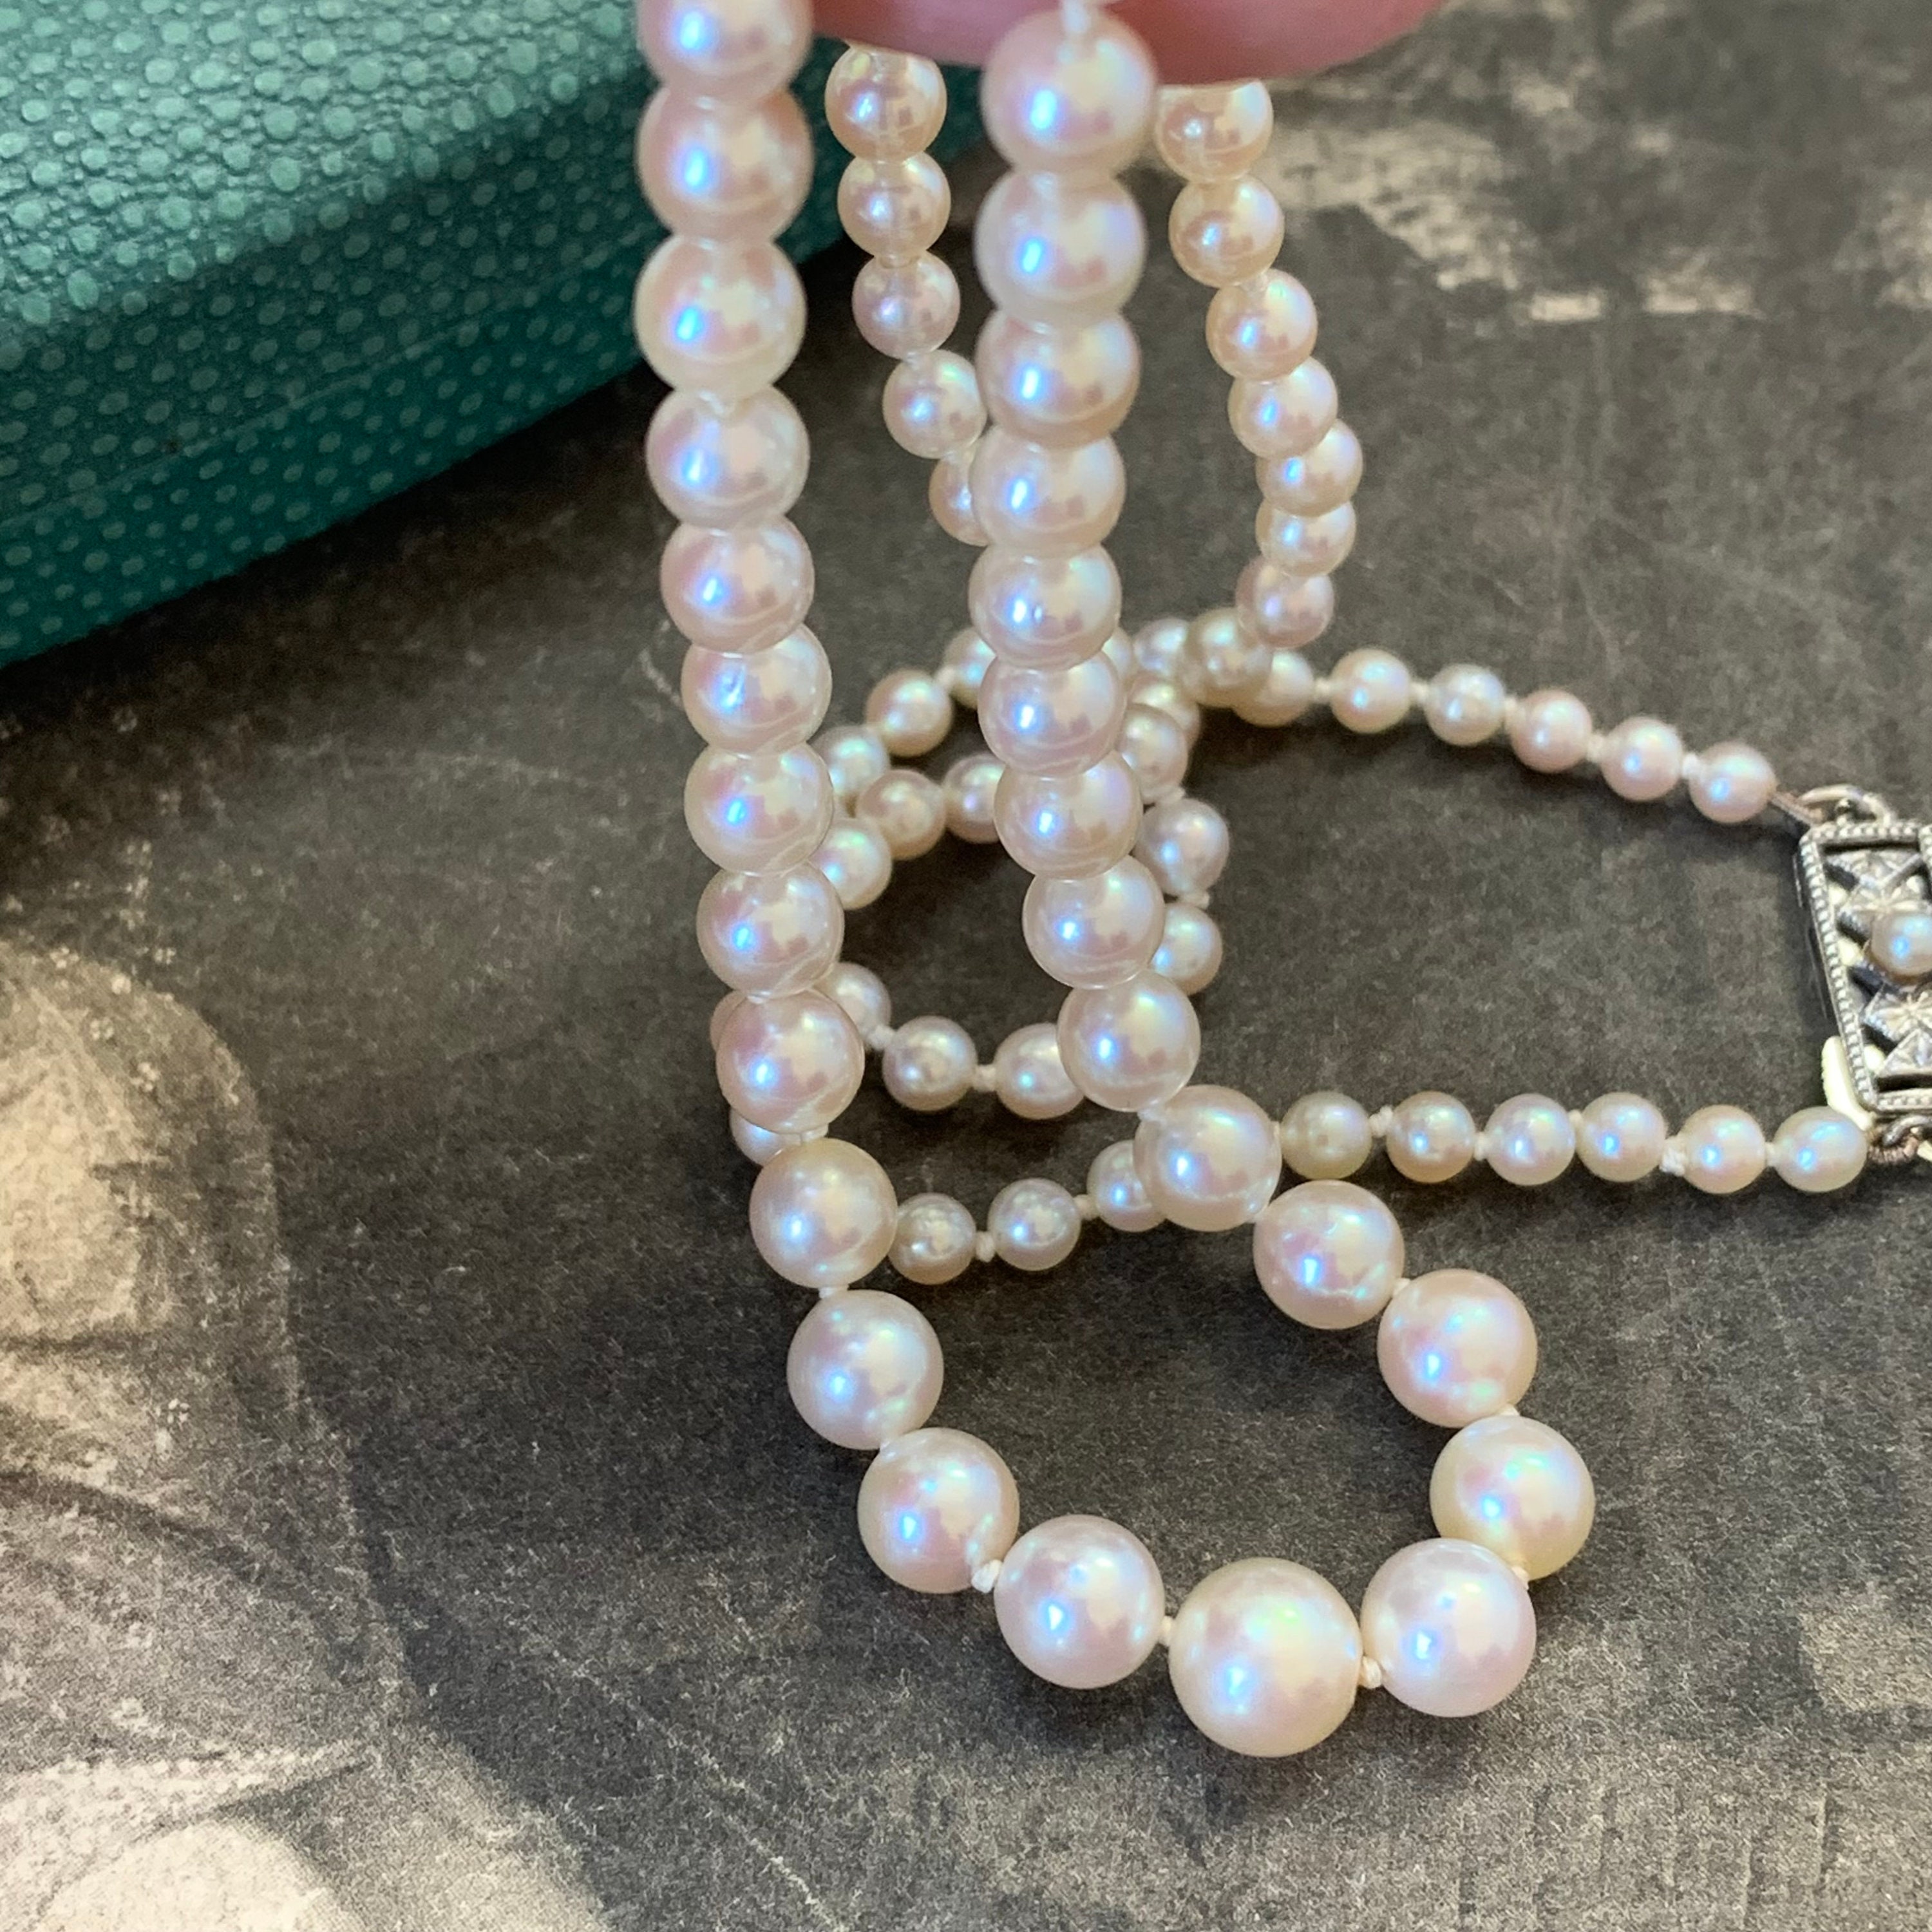 Mikimoto Akoya Pearl Graduated Necklace With A Lovely Silver Clasp. 20 Inches Long This Amazing Strand Comes The Original Box